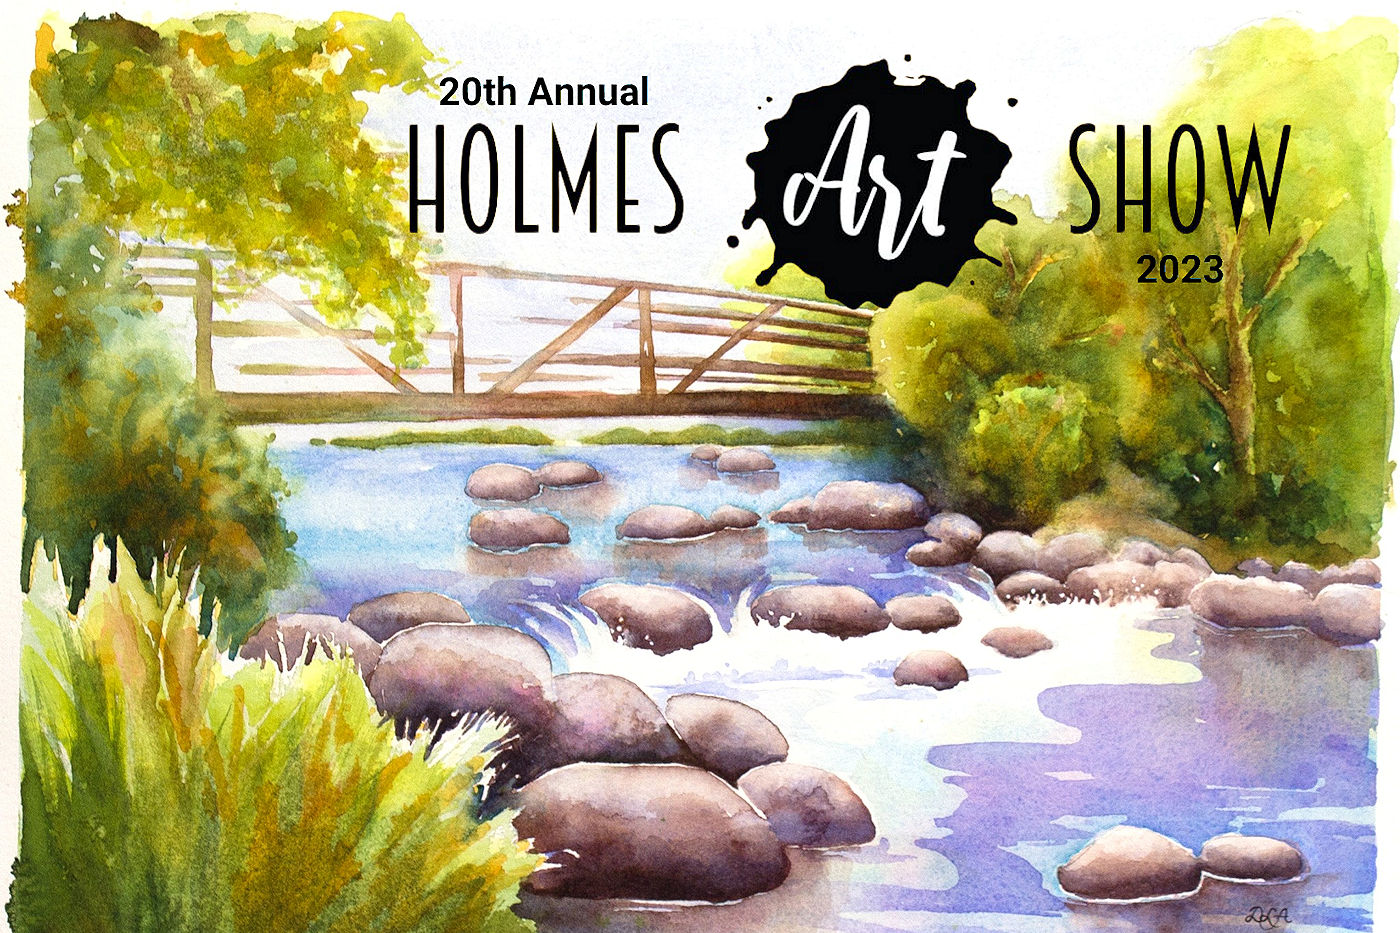 Holmes Art Show at the Historic Holmes Theatre